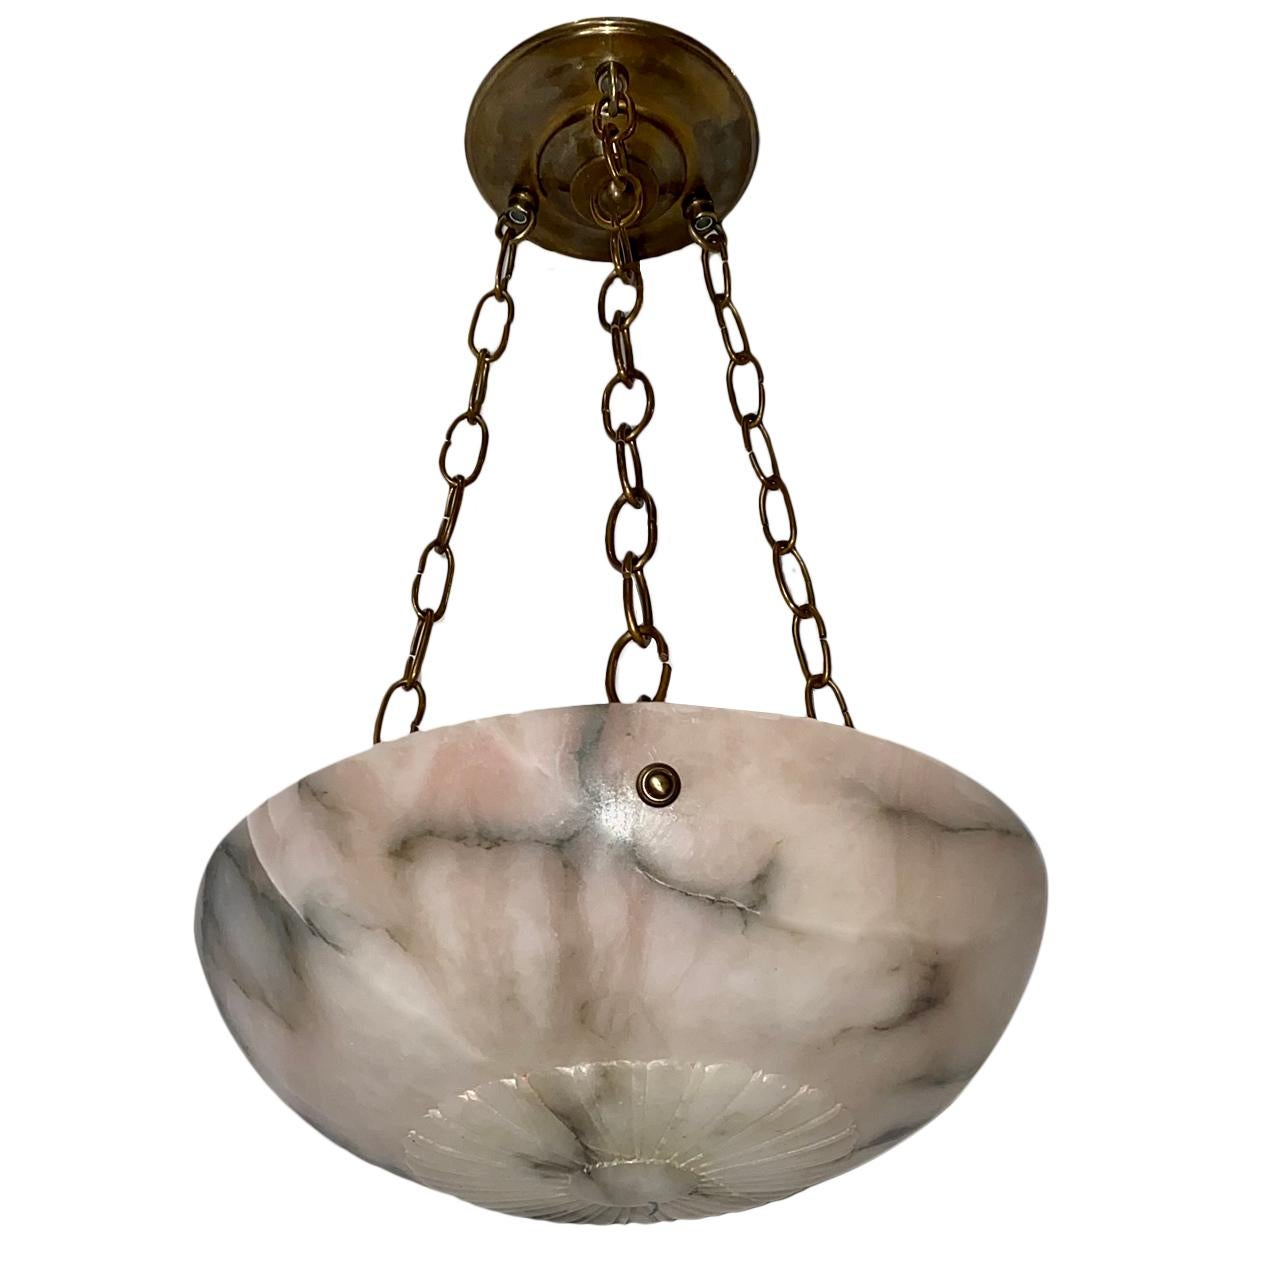 A circa 1920s French carved alabaster light fixture with three interior lights.

Measurements:
Diameter: 12